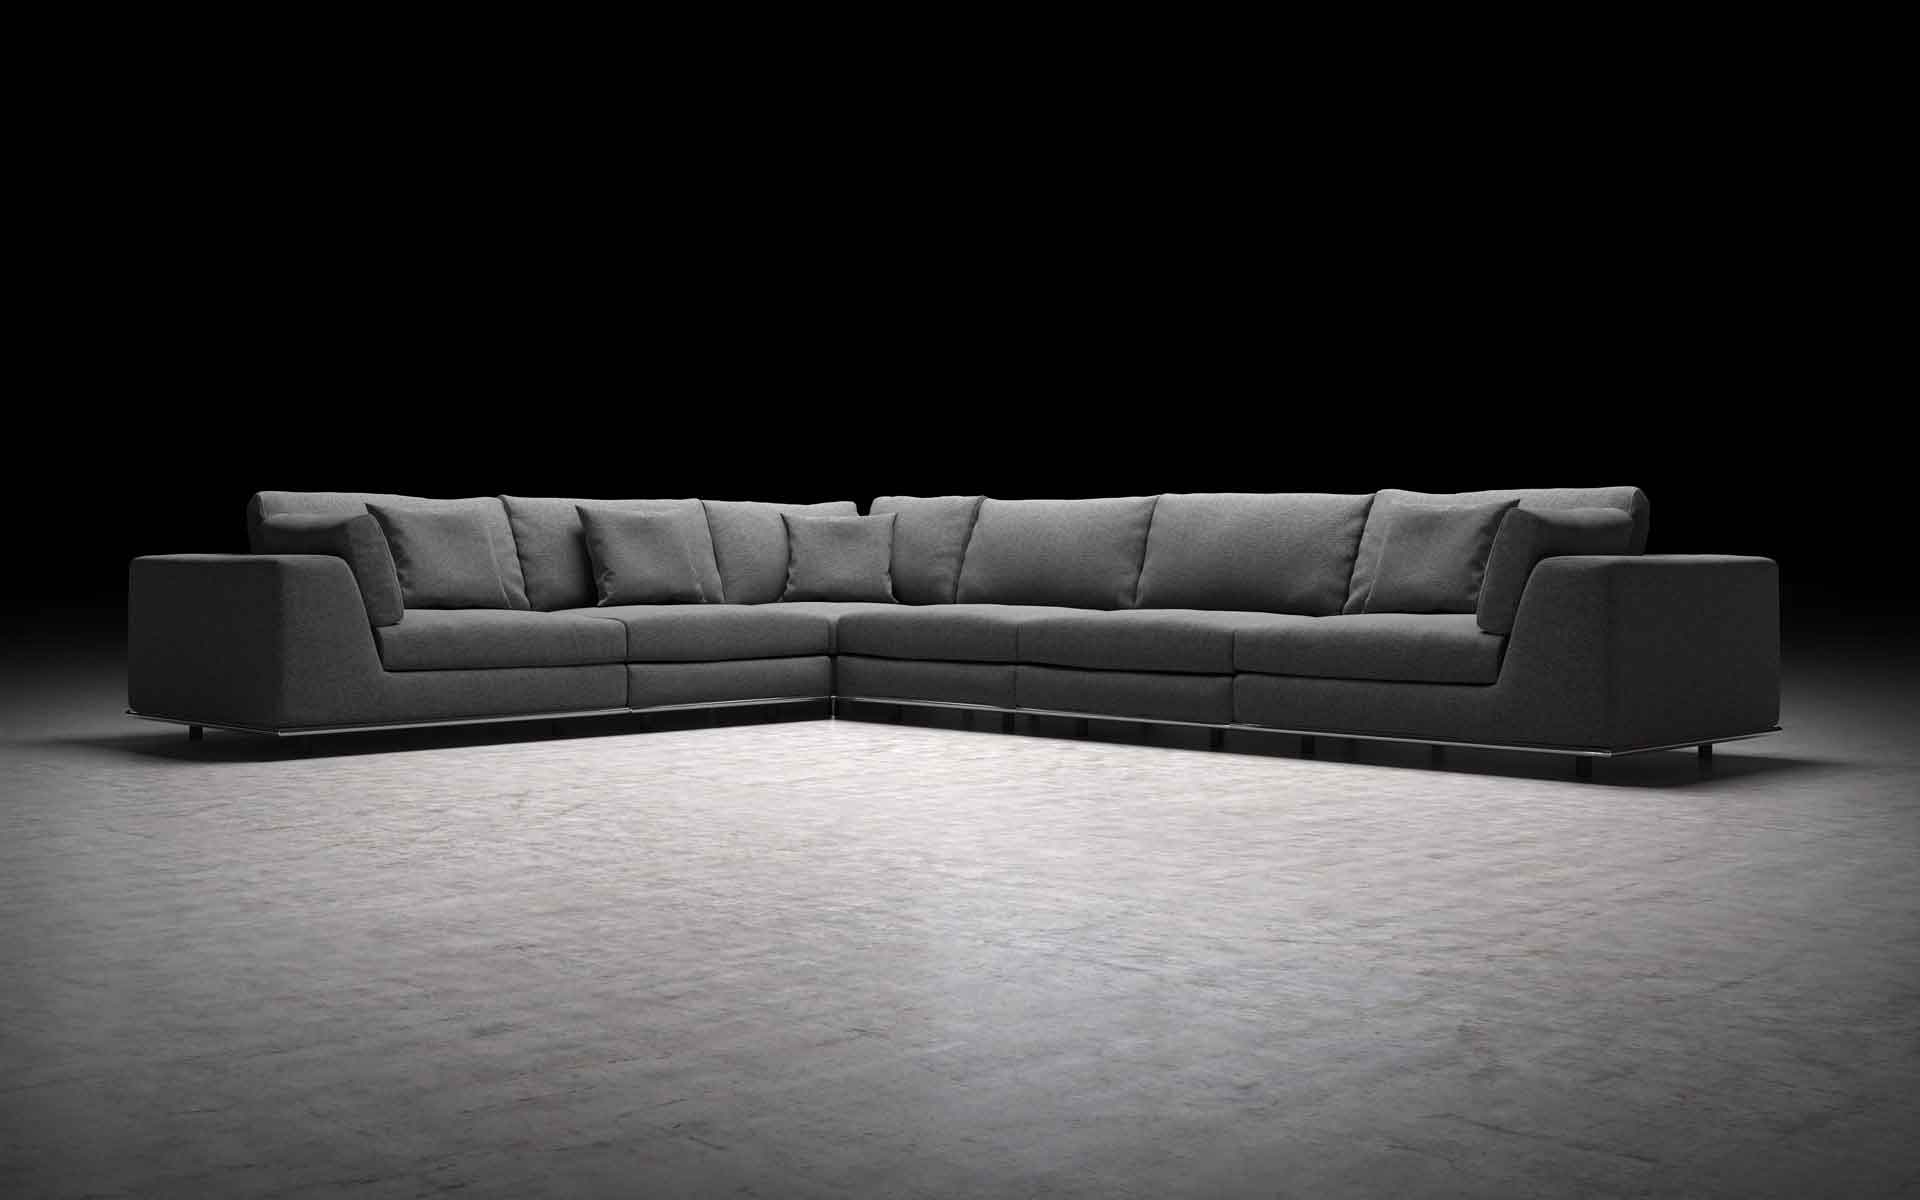 Perry Extended L-Corner Sofa Shadow Gray